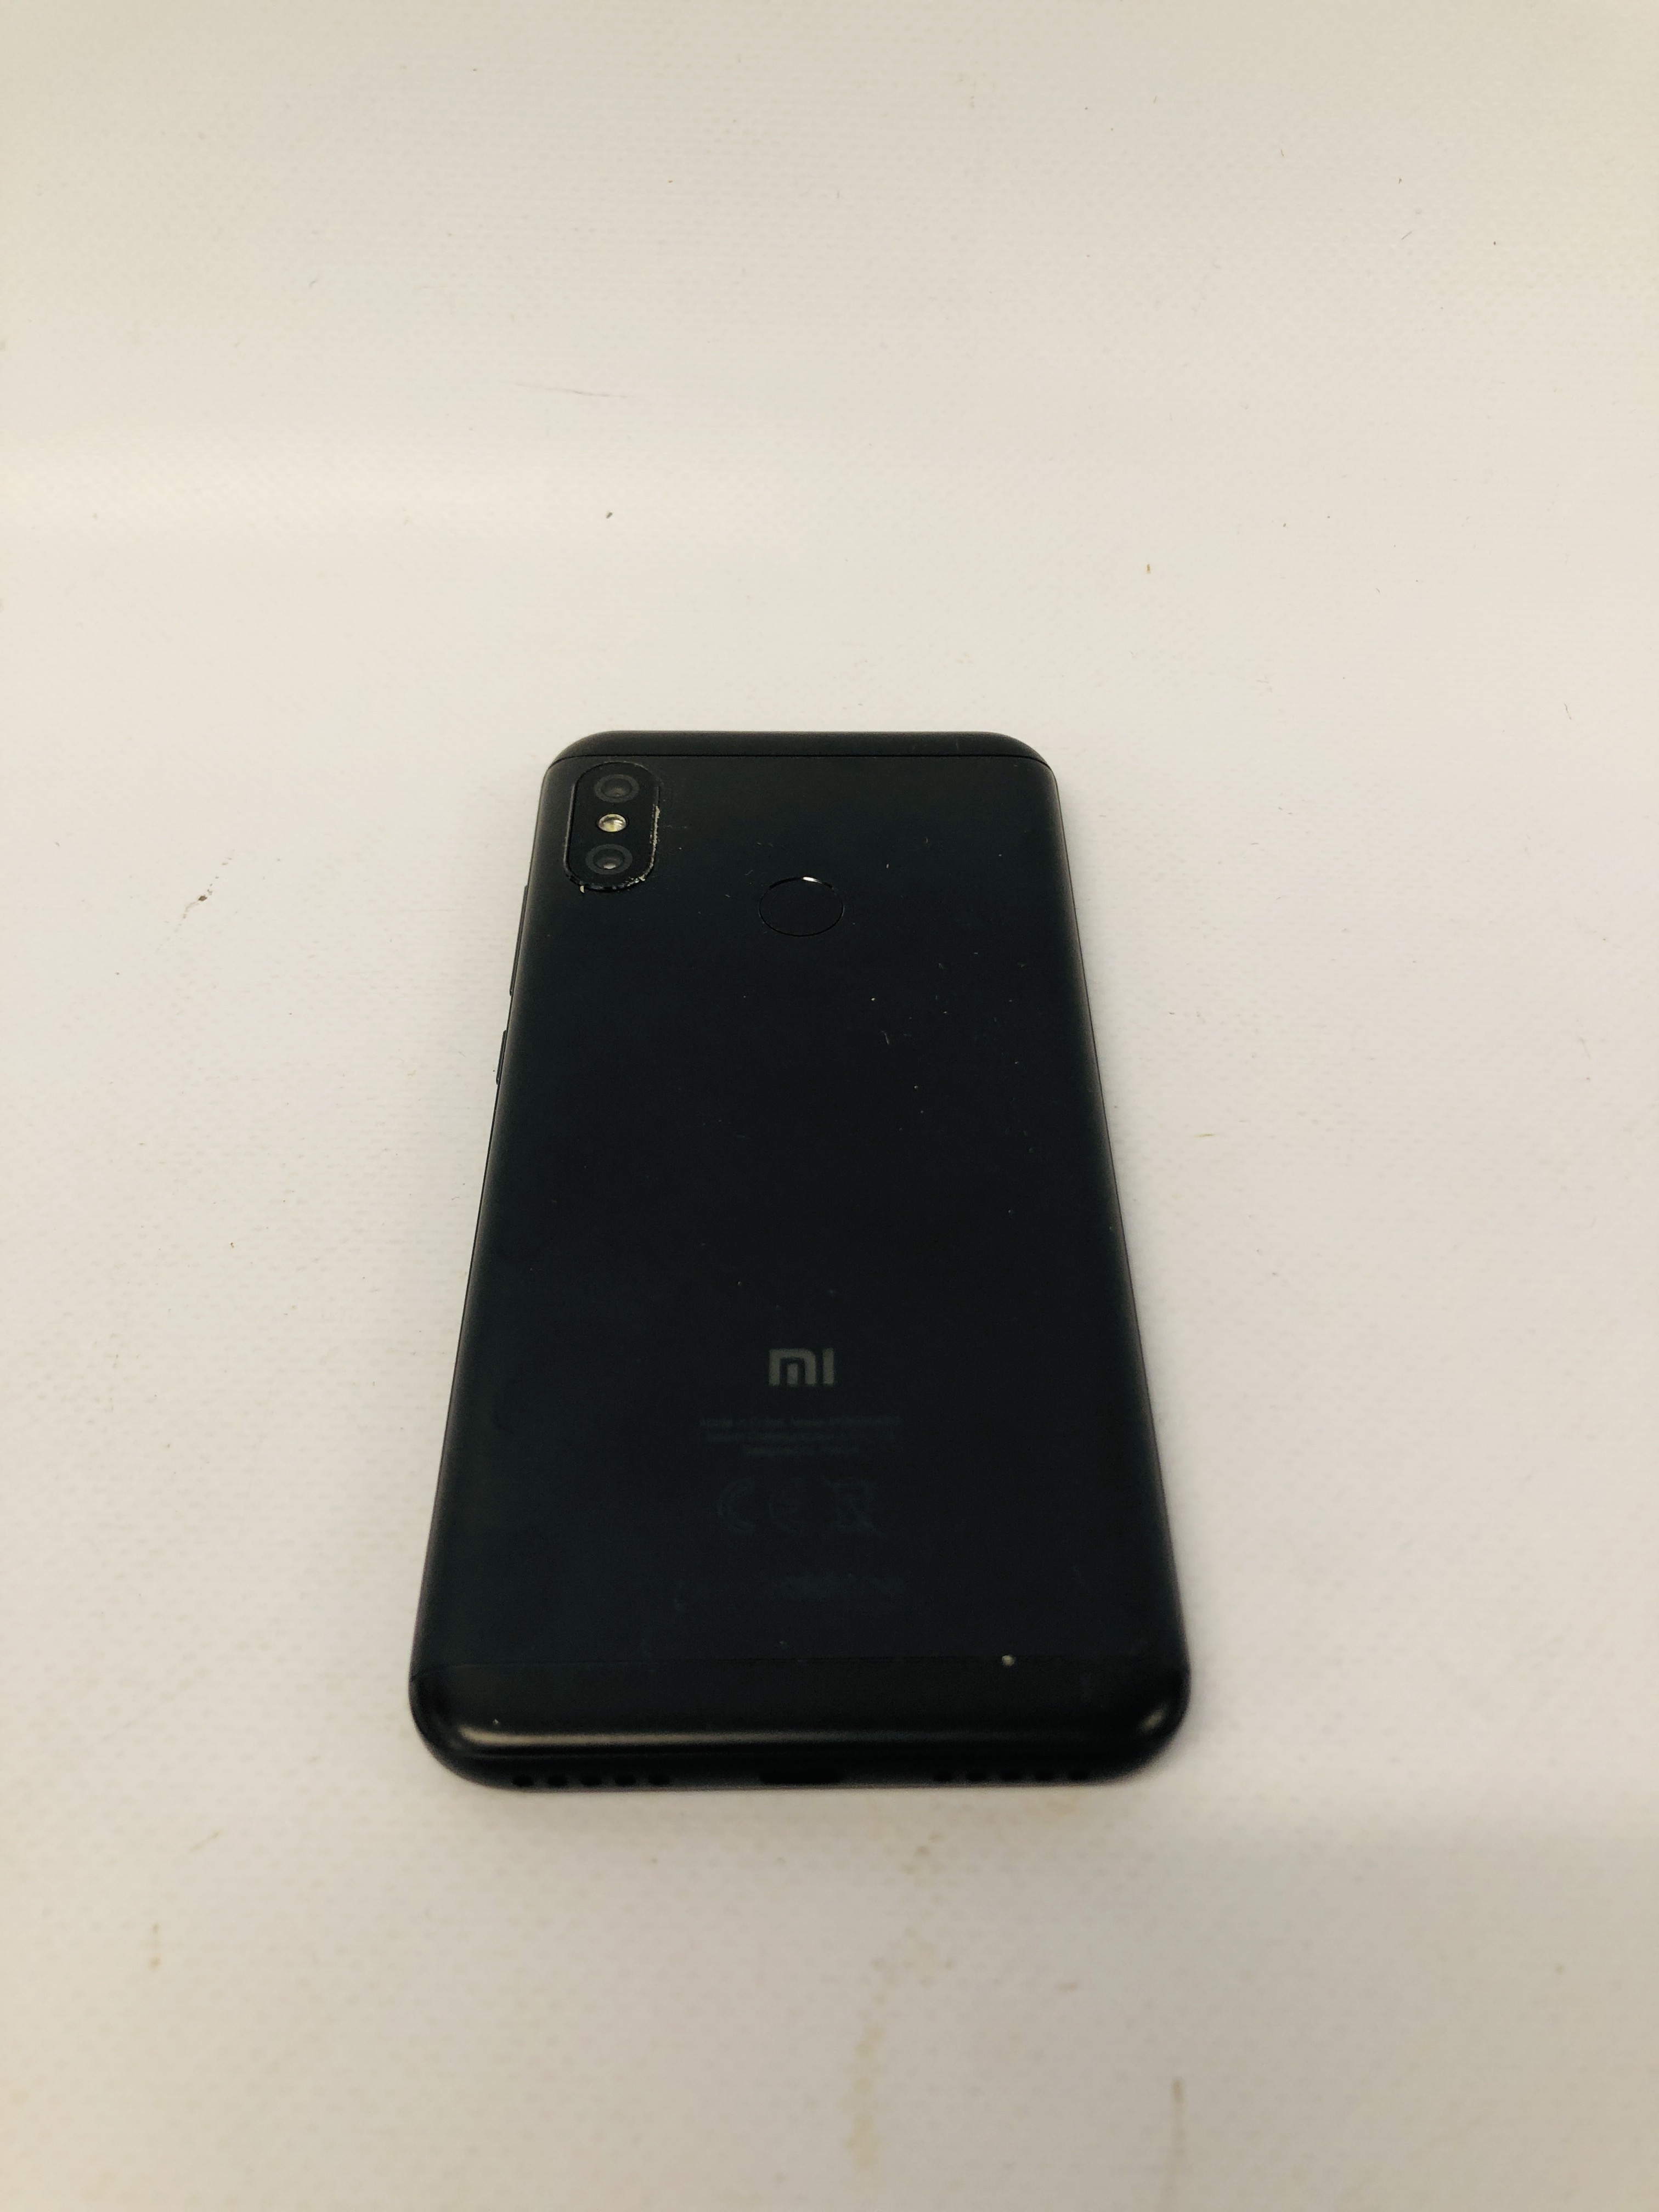 A NI SMARTPHONE MODEL M1805DISG - SOLD AS SEEN - NO GUARANTEE OF CONNECTIVITY - Image 4 of 4